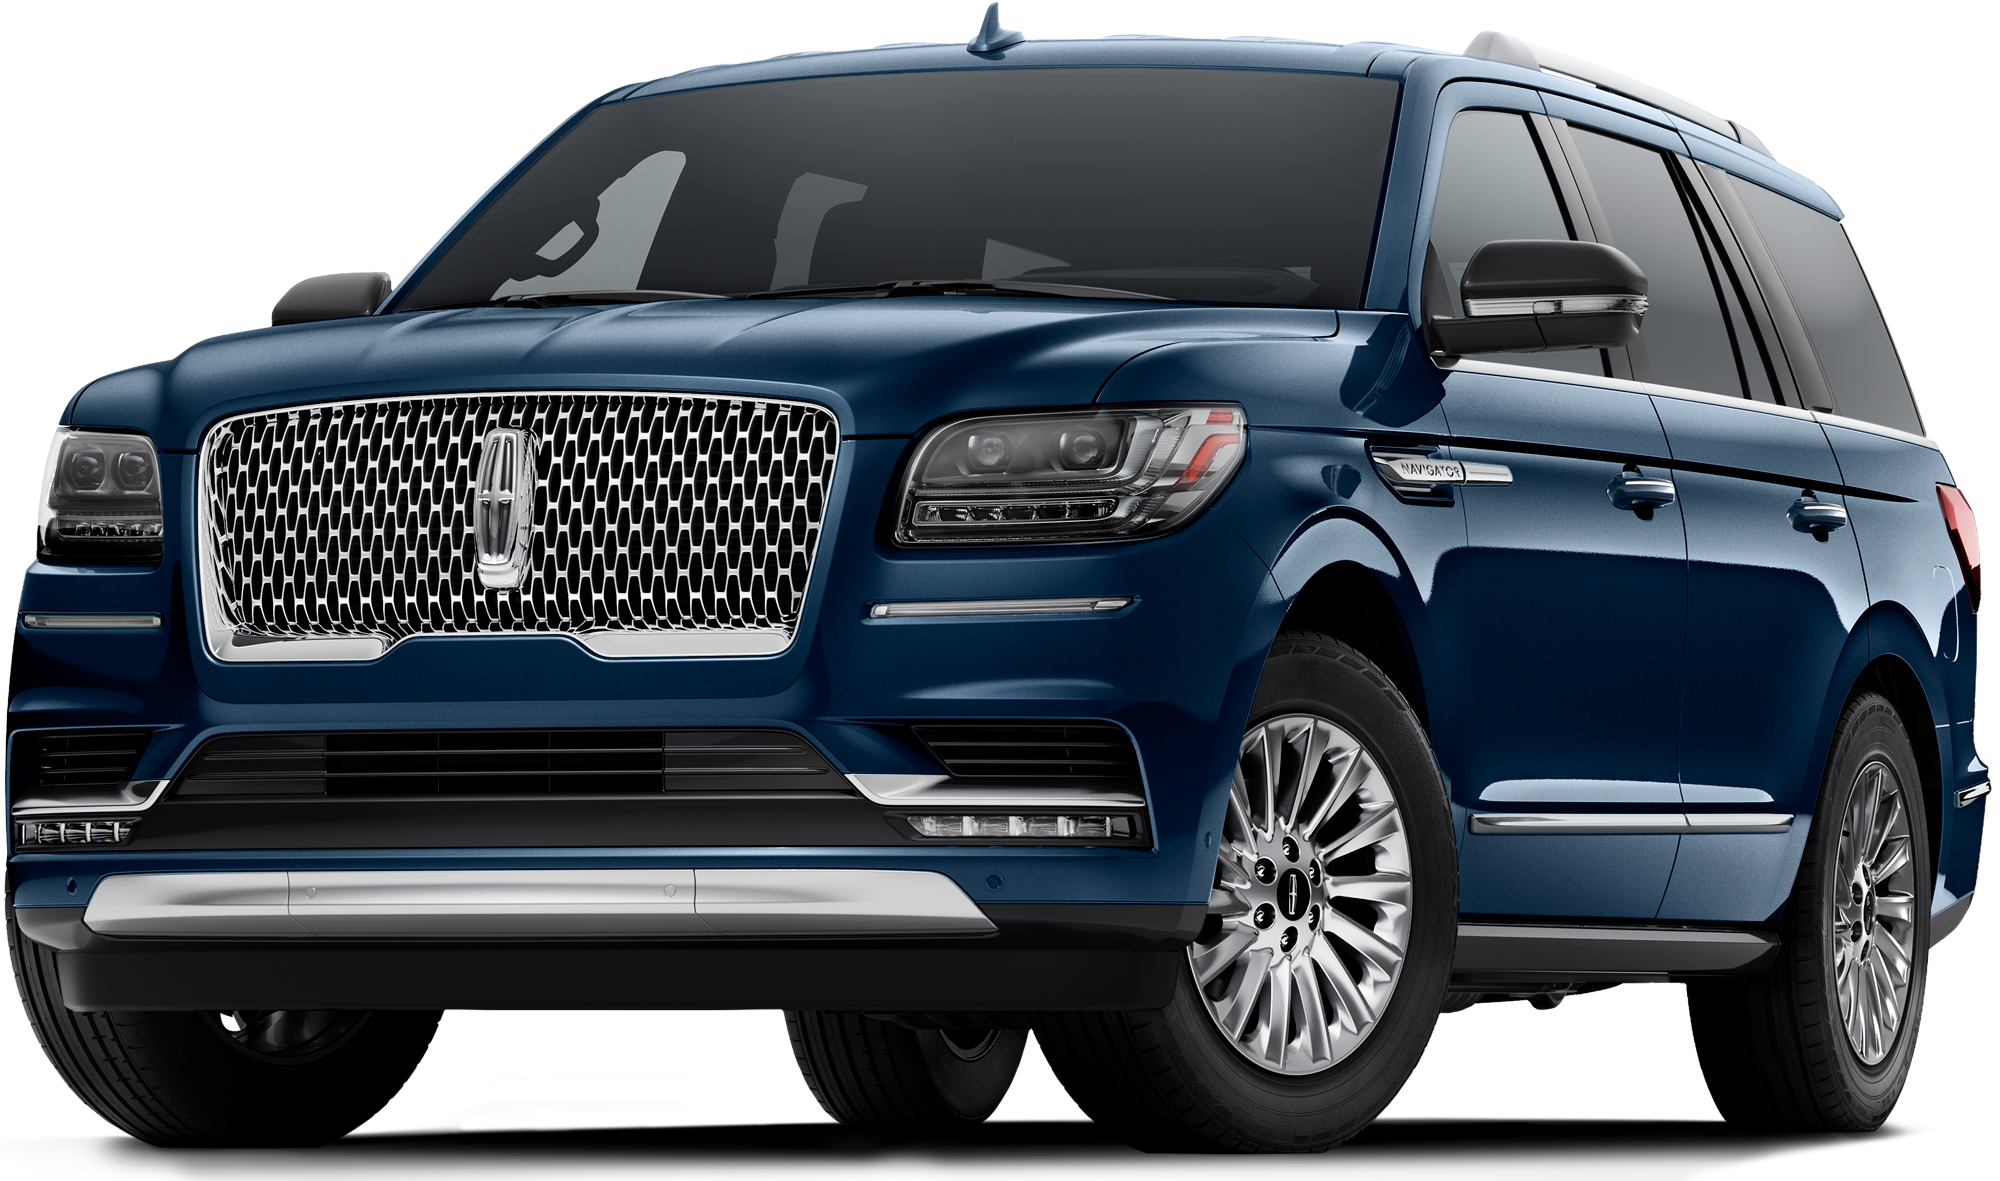 2021 Lincoln Navigator Incentives, Specials & Offers in Baton Rouge LA